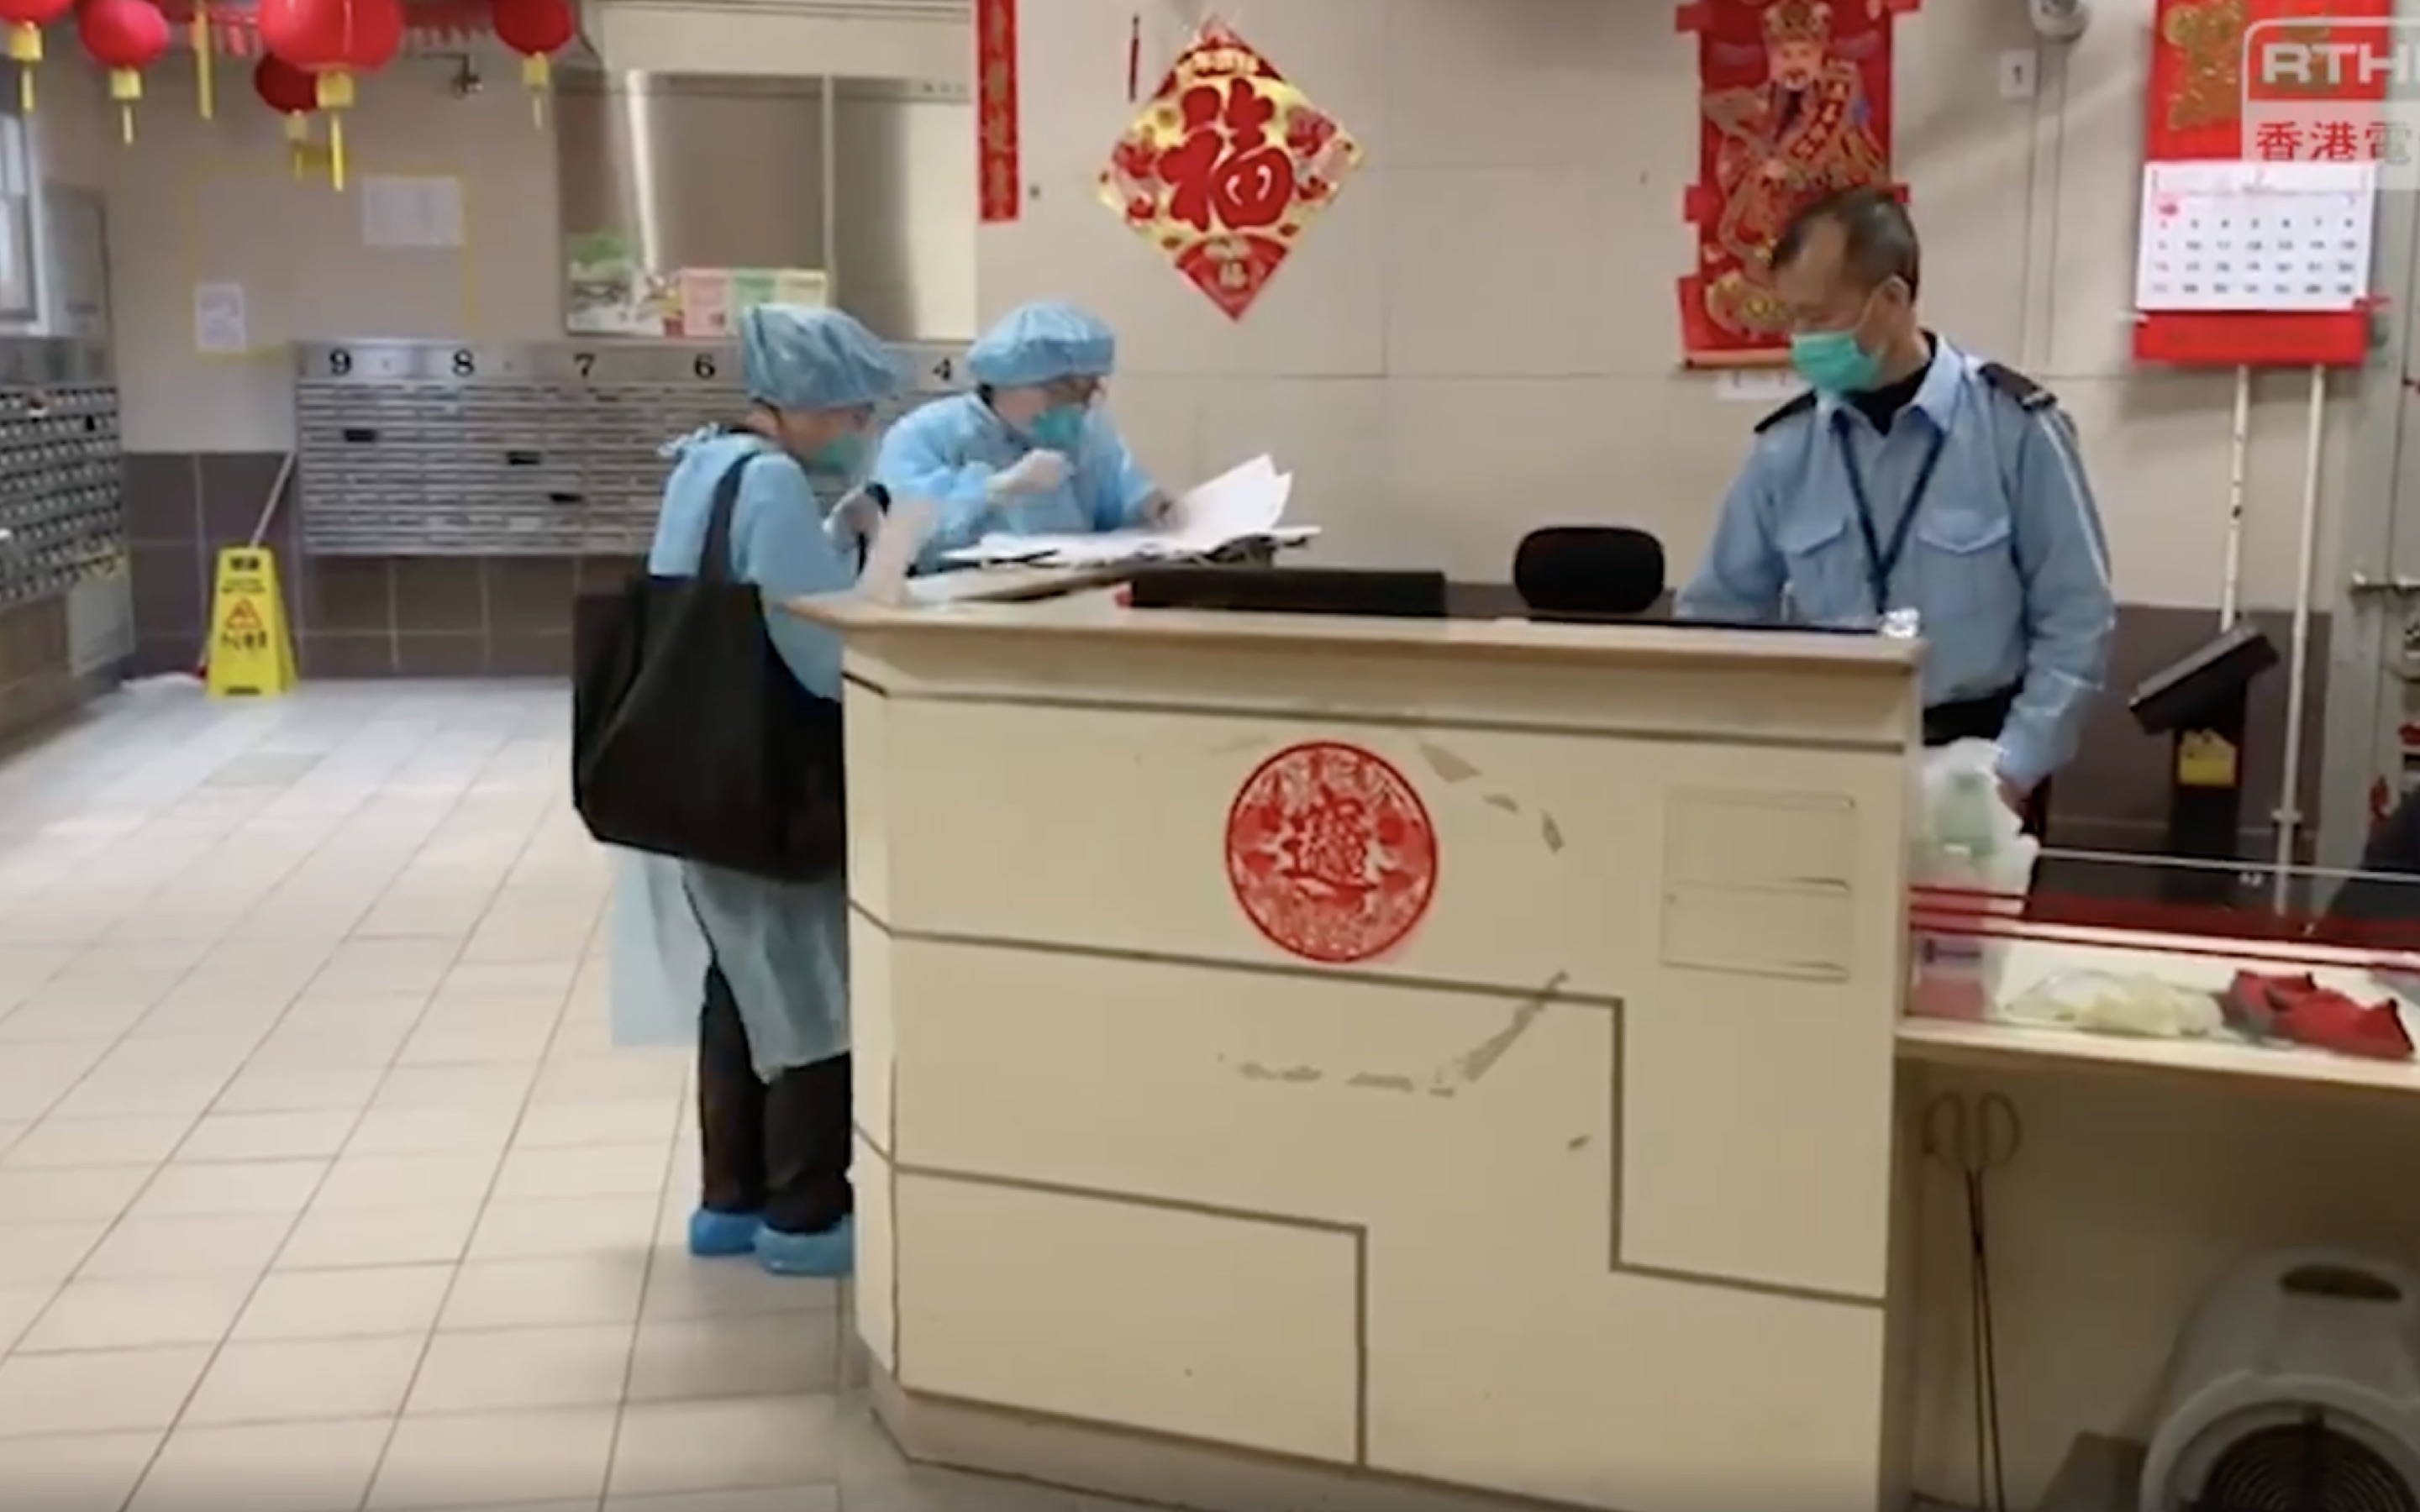 Centre for Health Protection personnel at Hong Mei House in Tsing Yi. Screengrab via Facebook/RTHK.